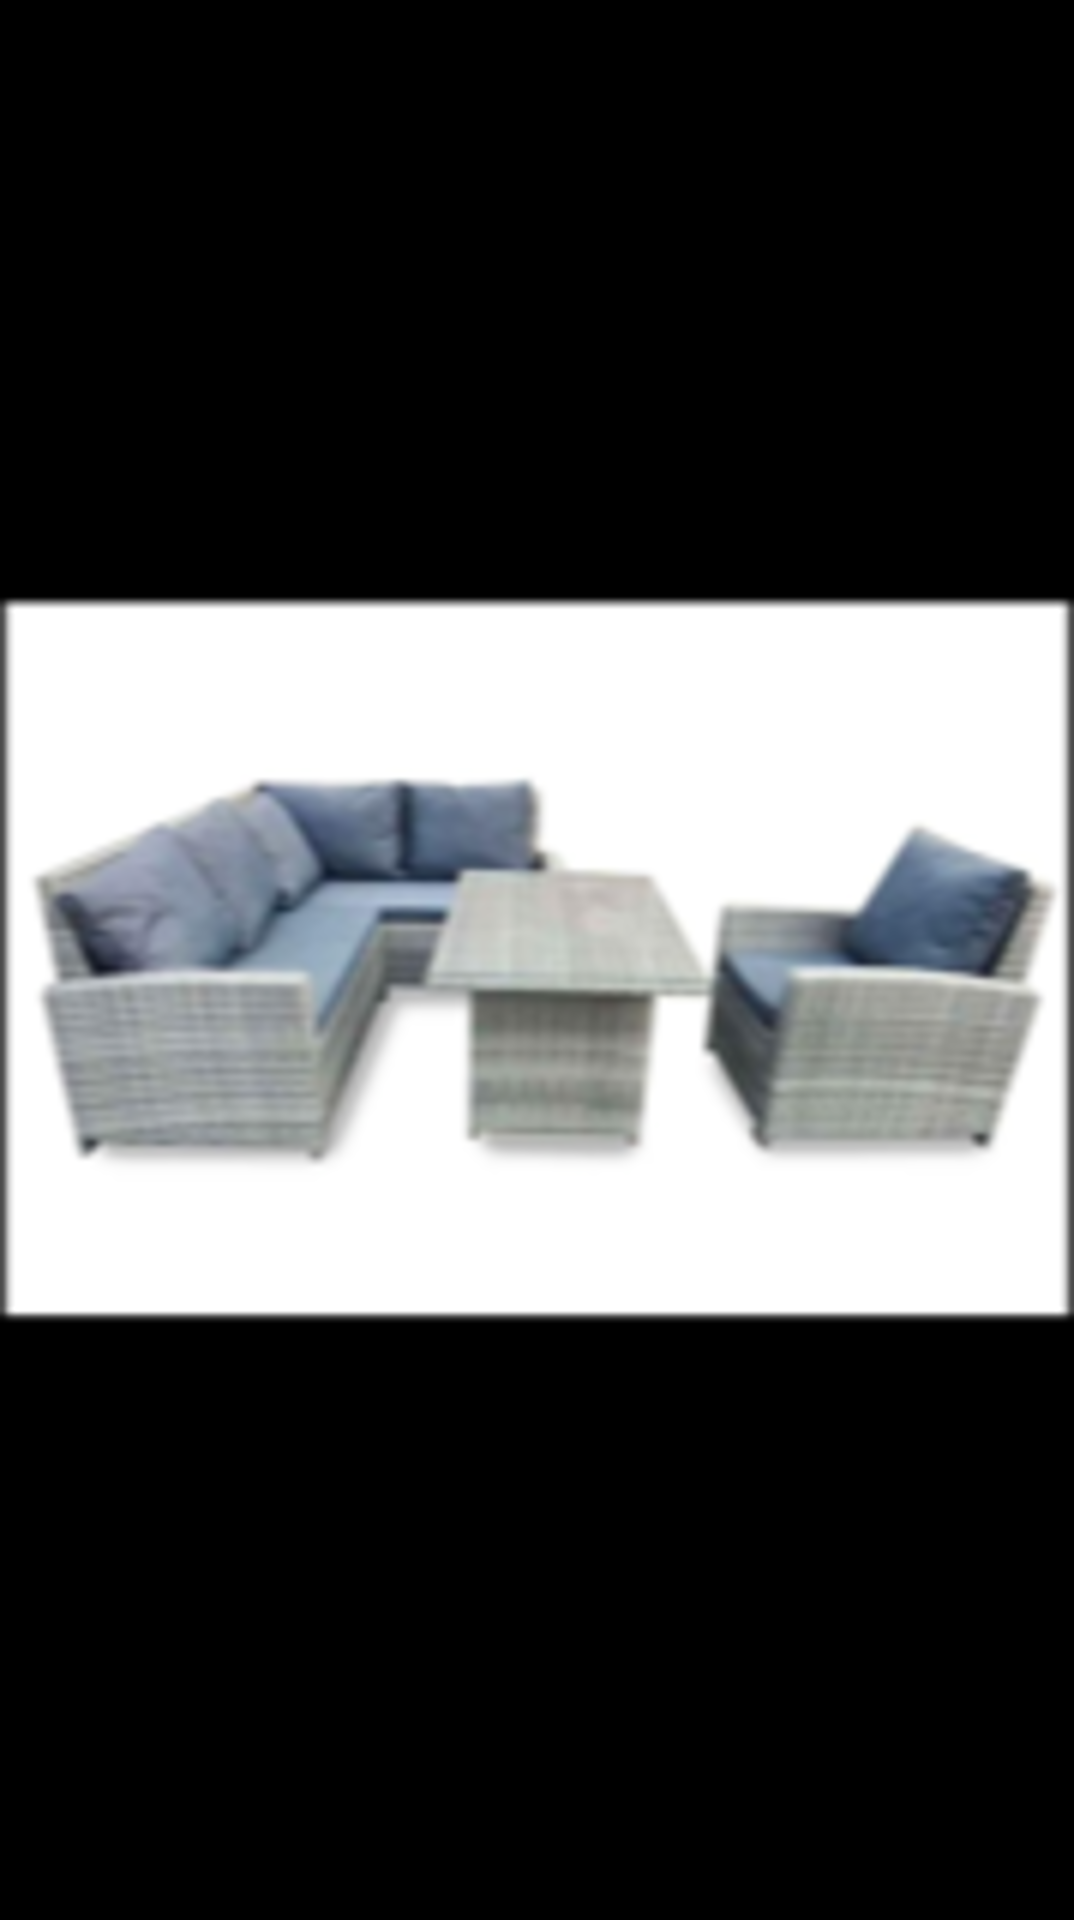 Rattan style garden dining set with weatherproof cover - Image 3 of 3